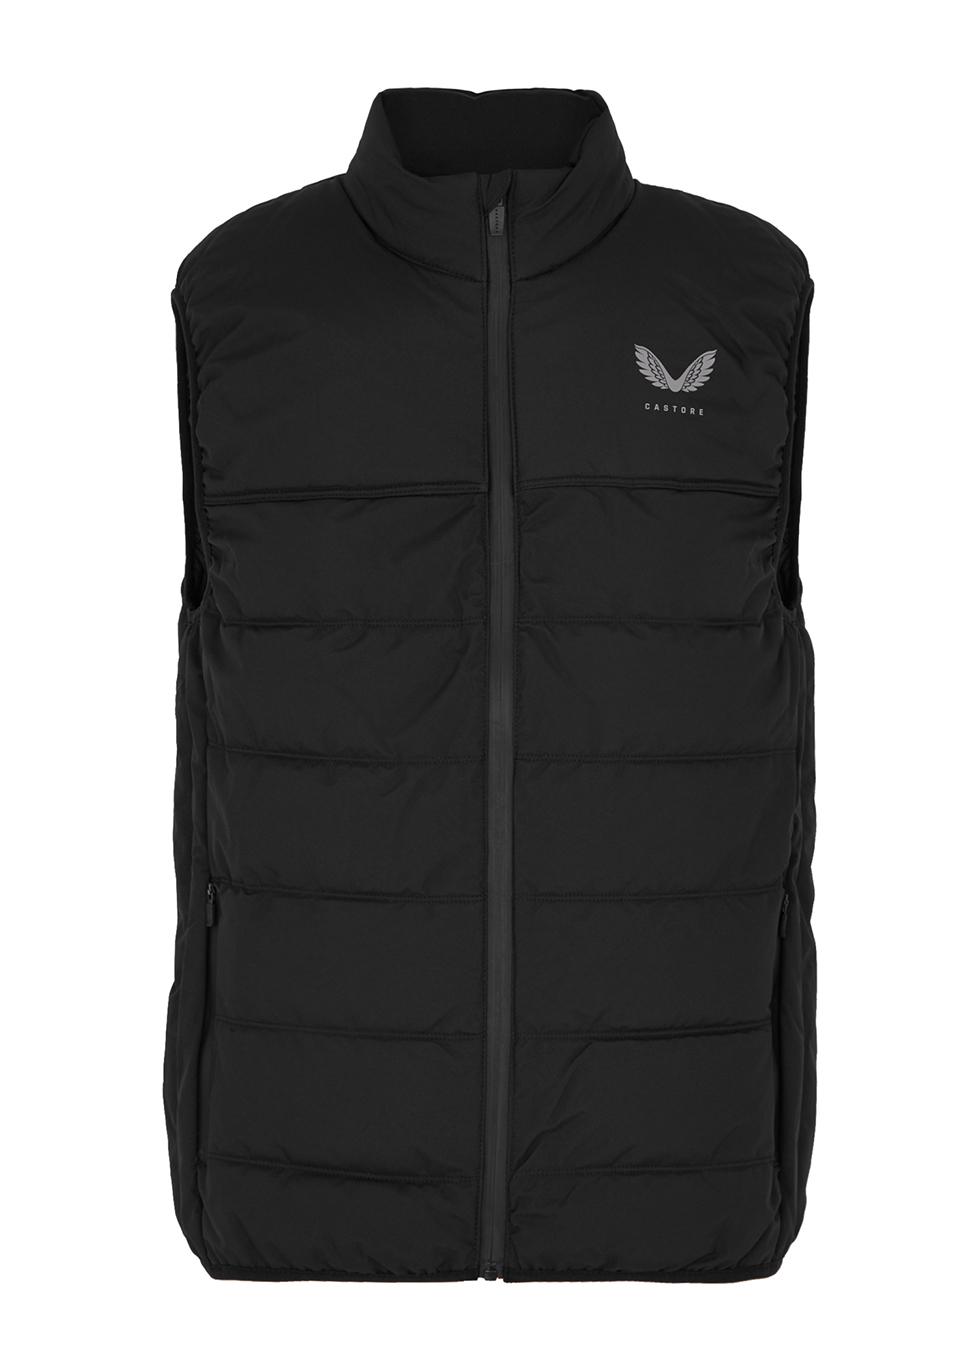 Onyx Protek quilted shell gilet by CASTORE